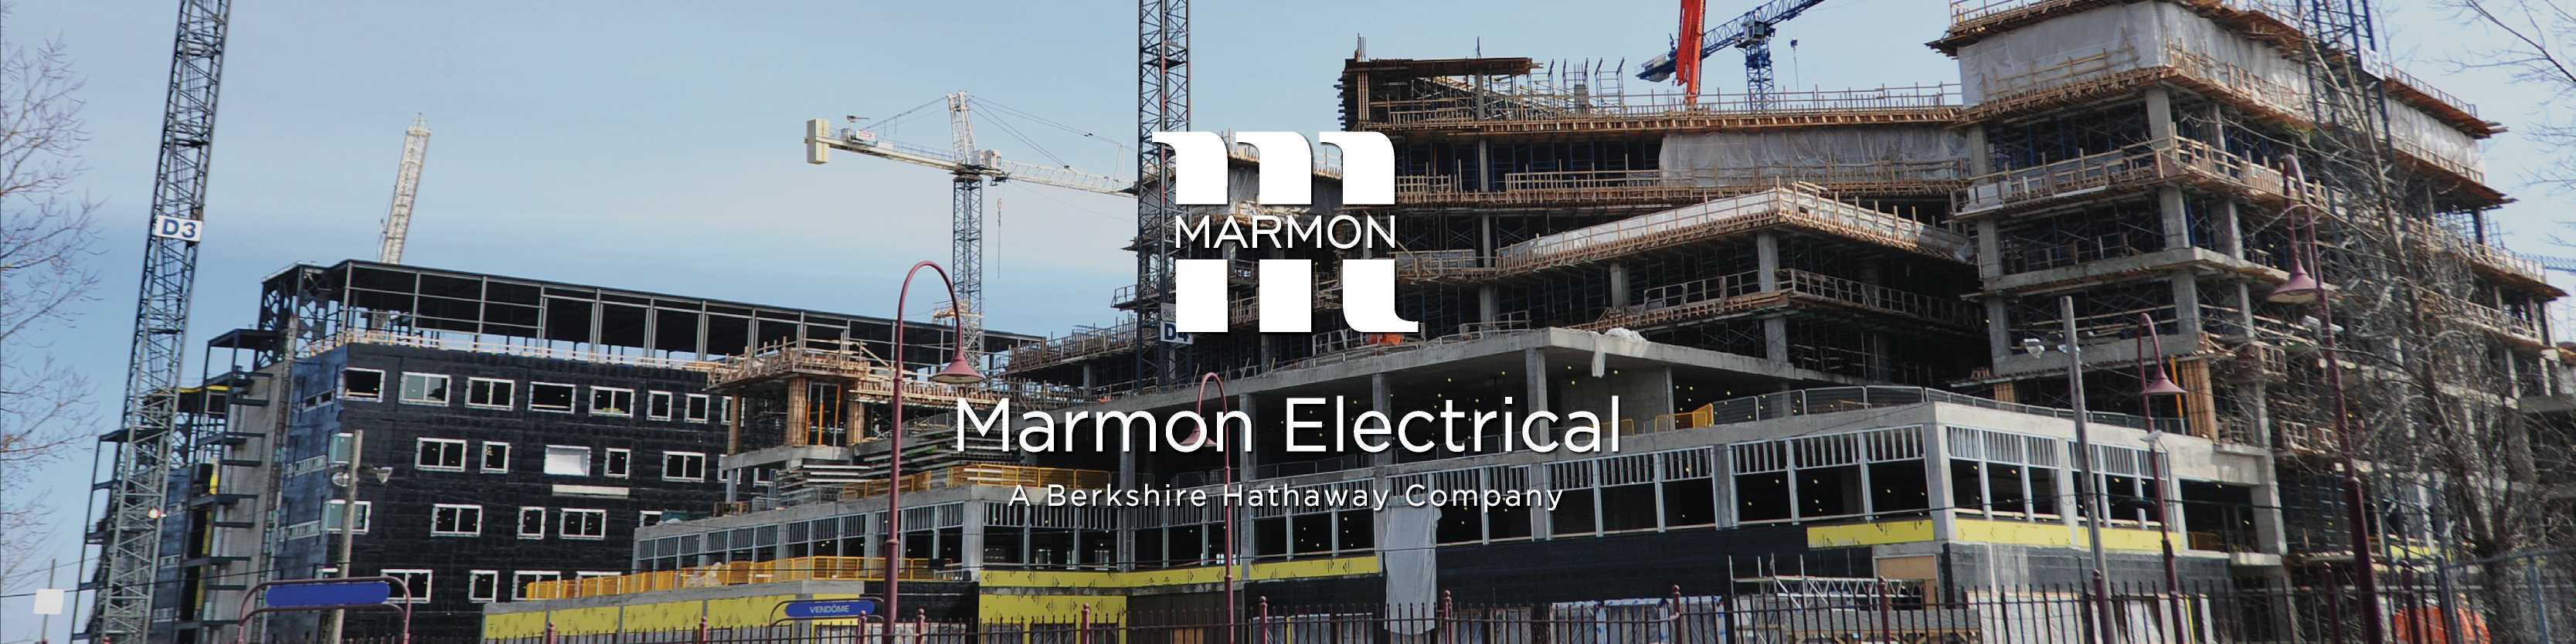 Featured Suppliers Banner Image - Marmon Electrical